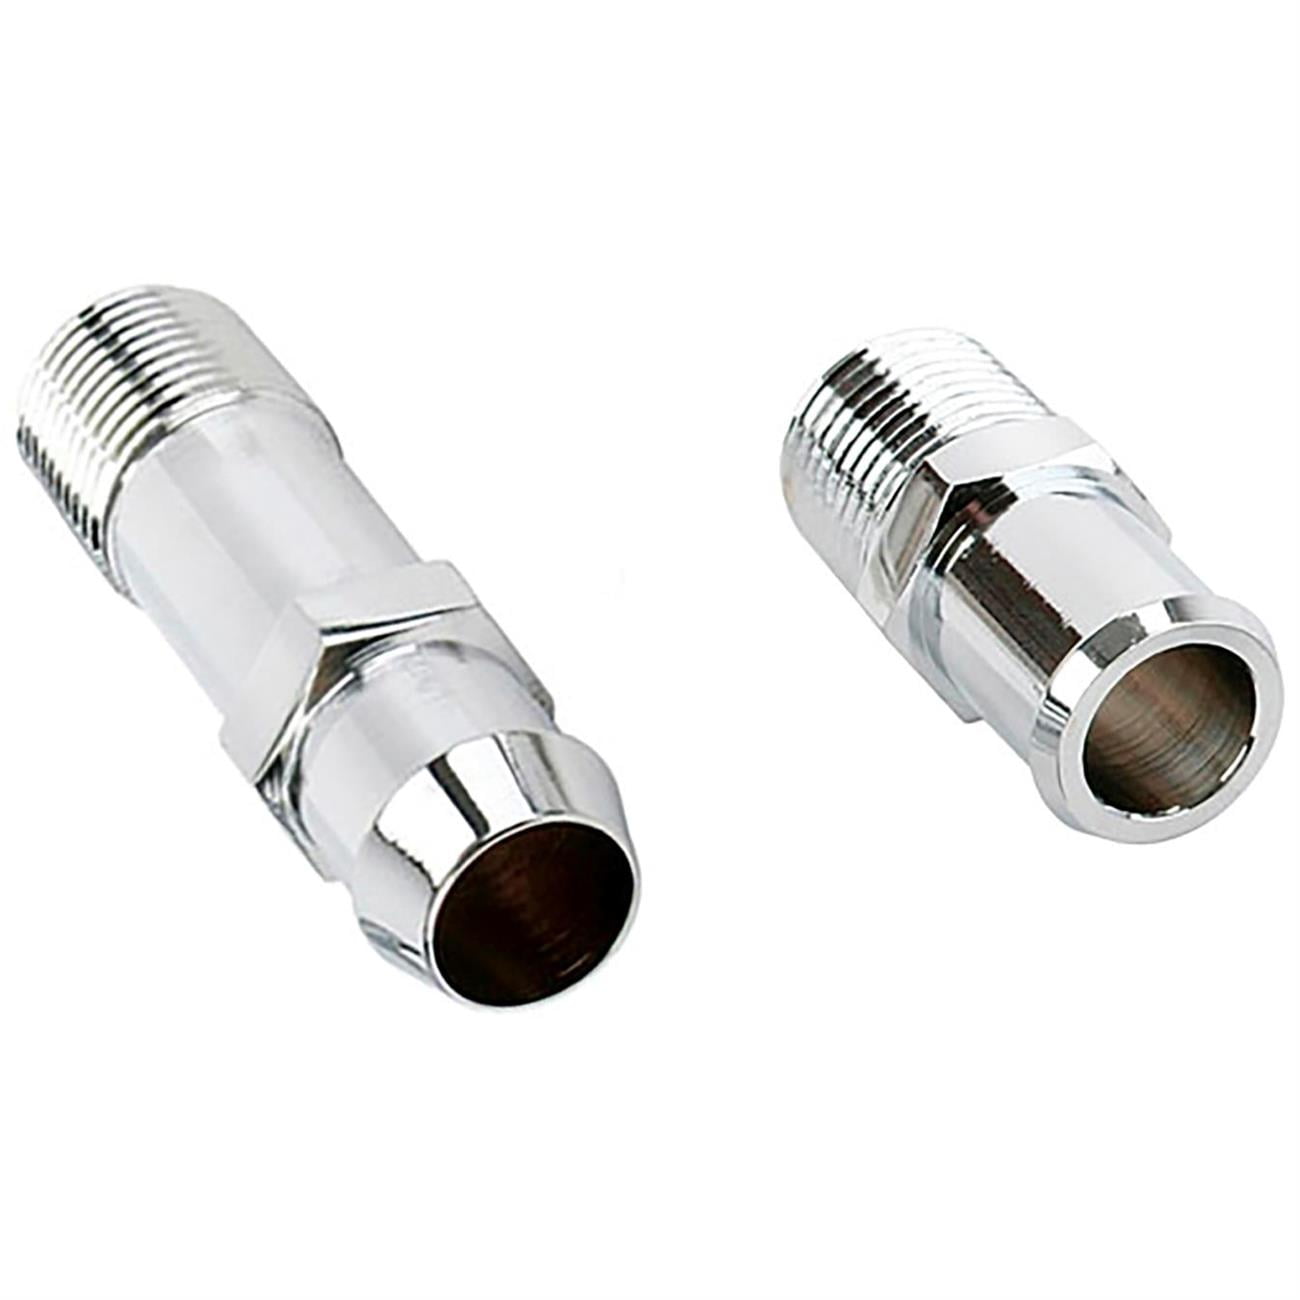 Repl 3/4 and 5/8 Inch Hose Chrome Short Heater Hose Fitting Kit 